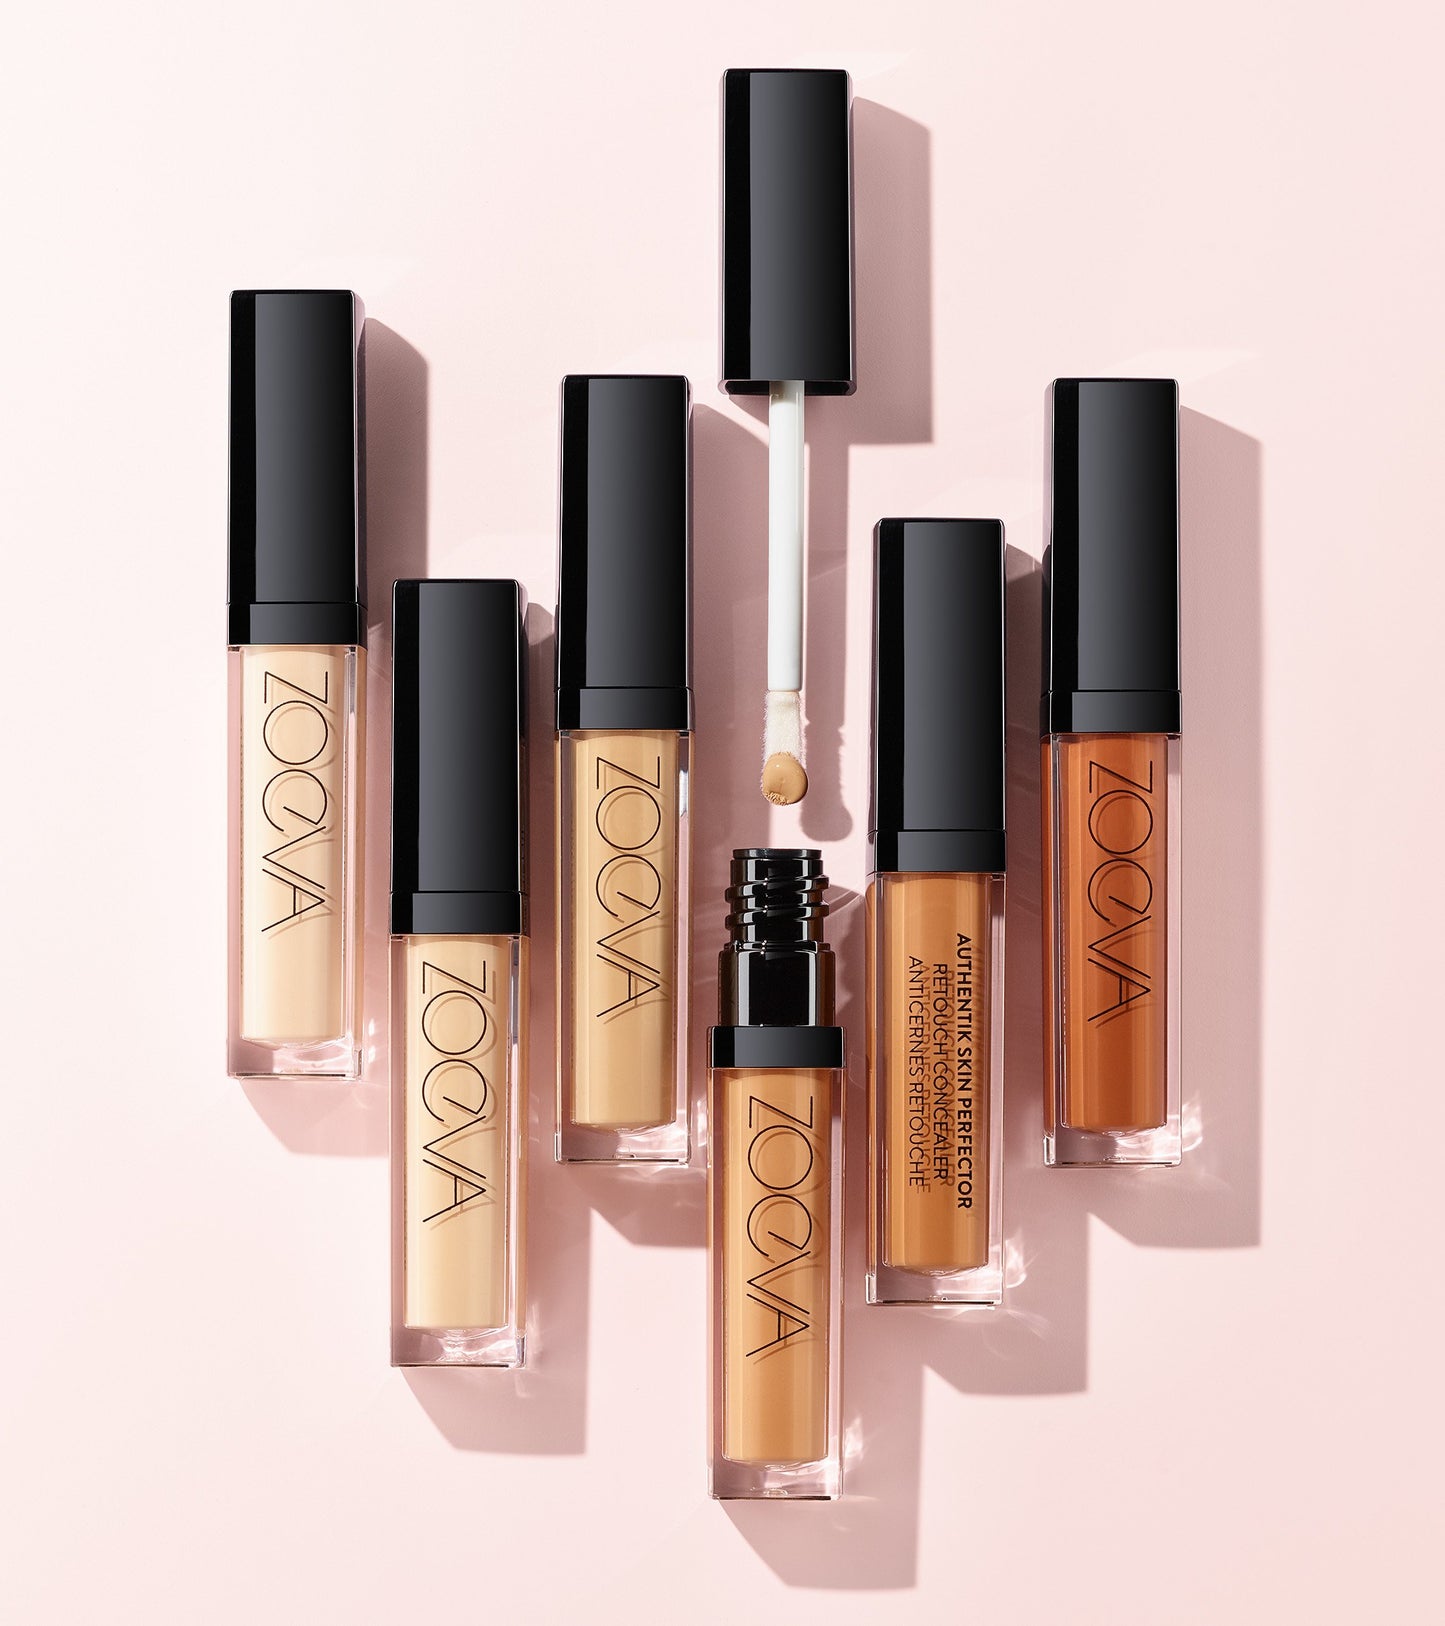 AUTHENTIK SKIN PERFECTOR CONCEALER (190 POSITIVE) Expanded Image 4